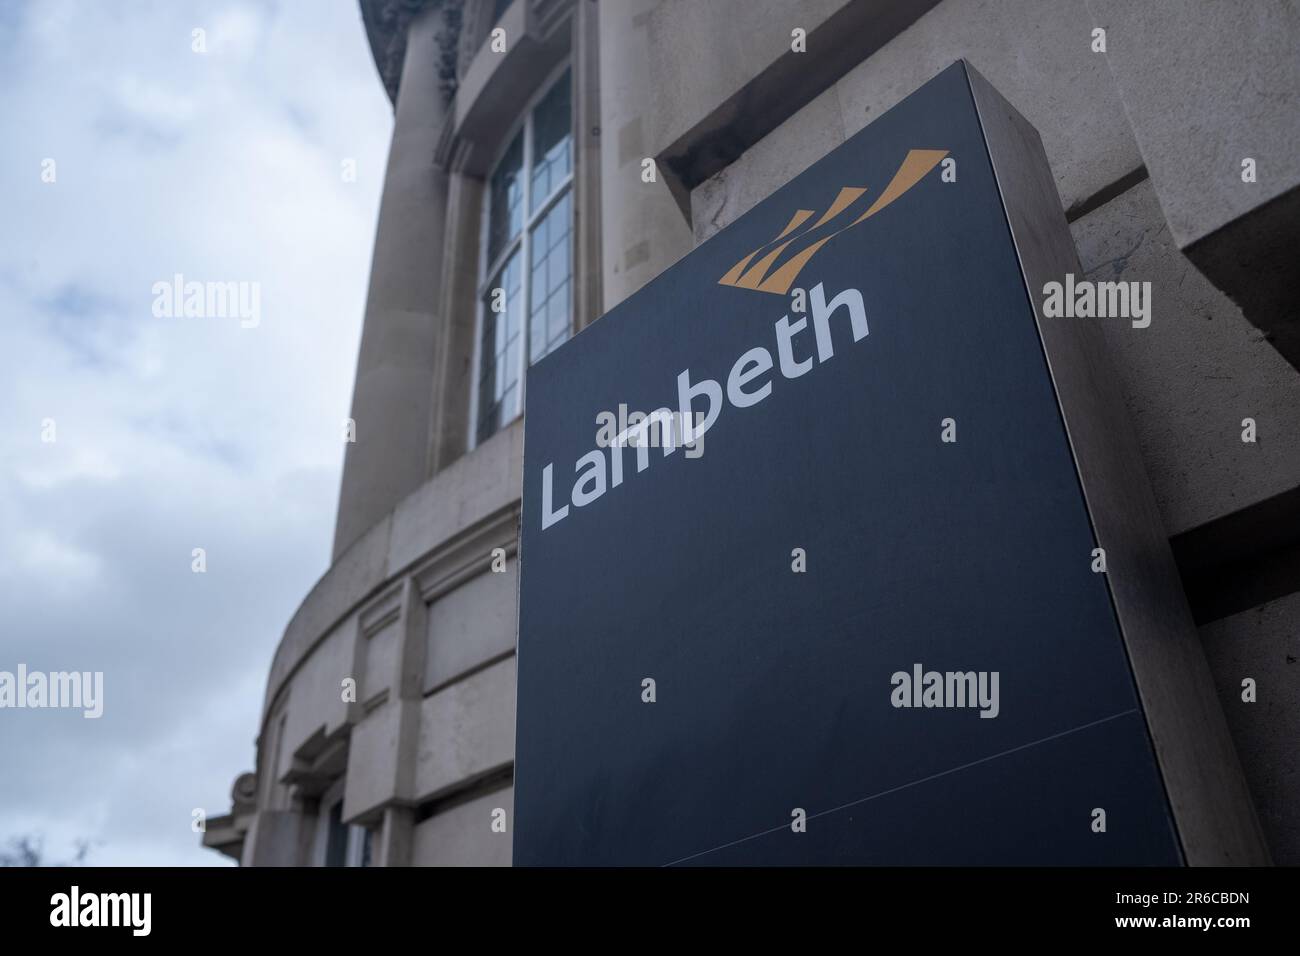 LONDON, MARCH 2023: Lambeth London Borough Council sign and logo outside Town Hall building in Brixton, south west London Stock Photo